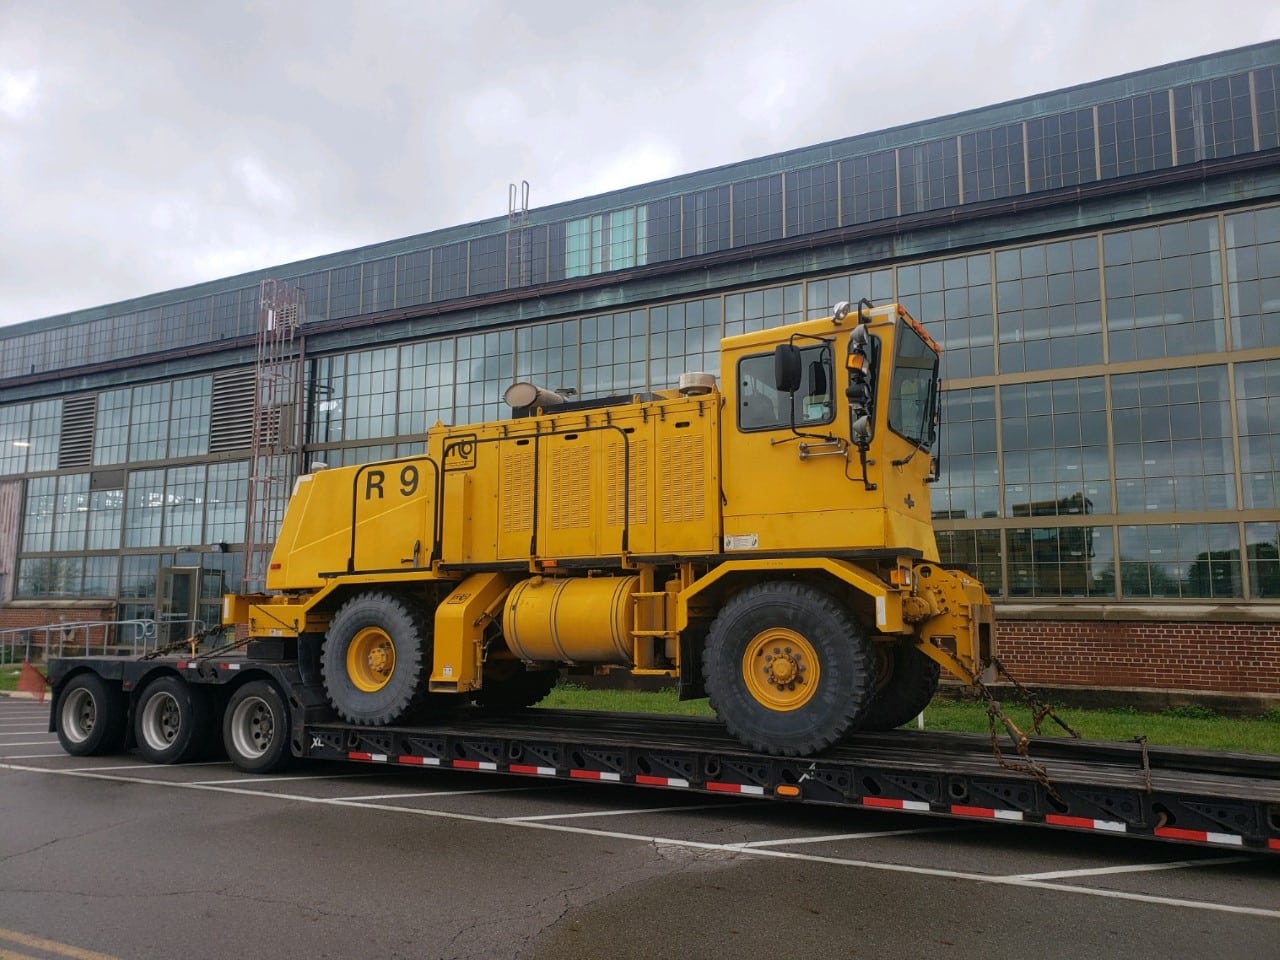 Transporting an Oshkosh airport plow on a lowboy trailer